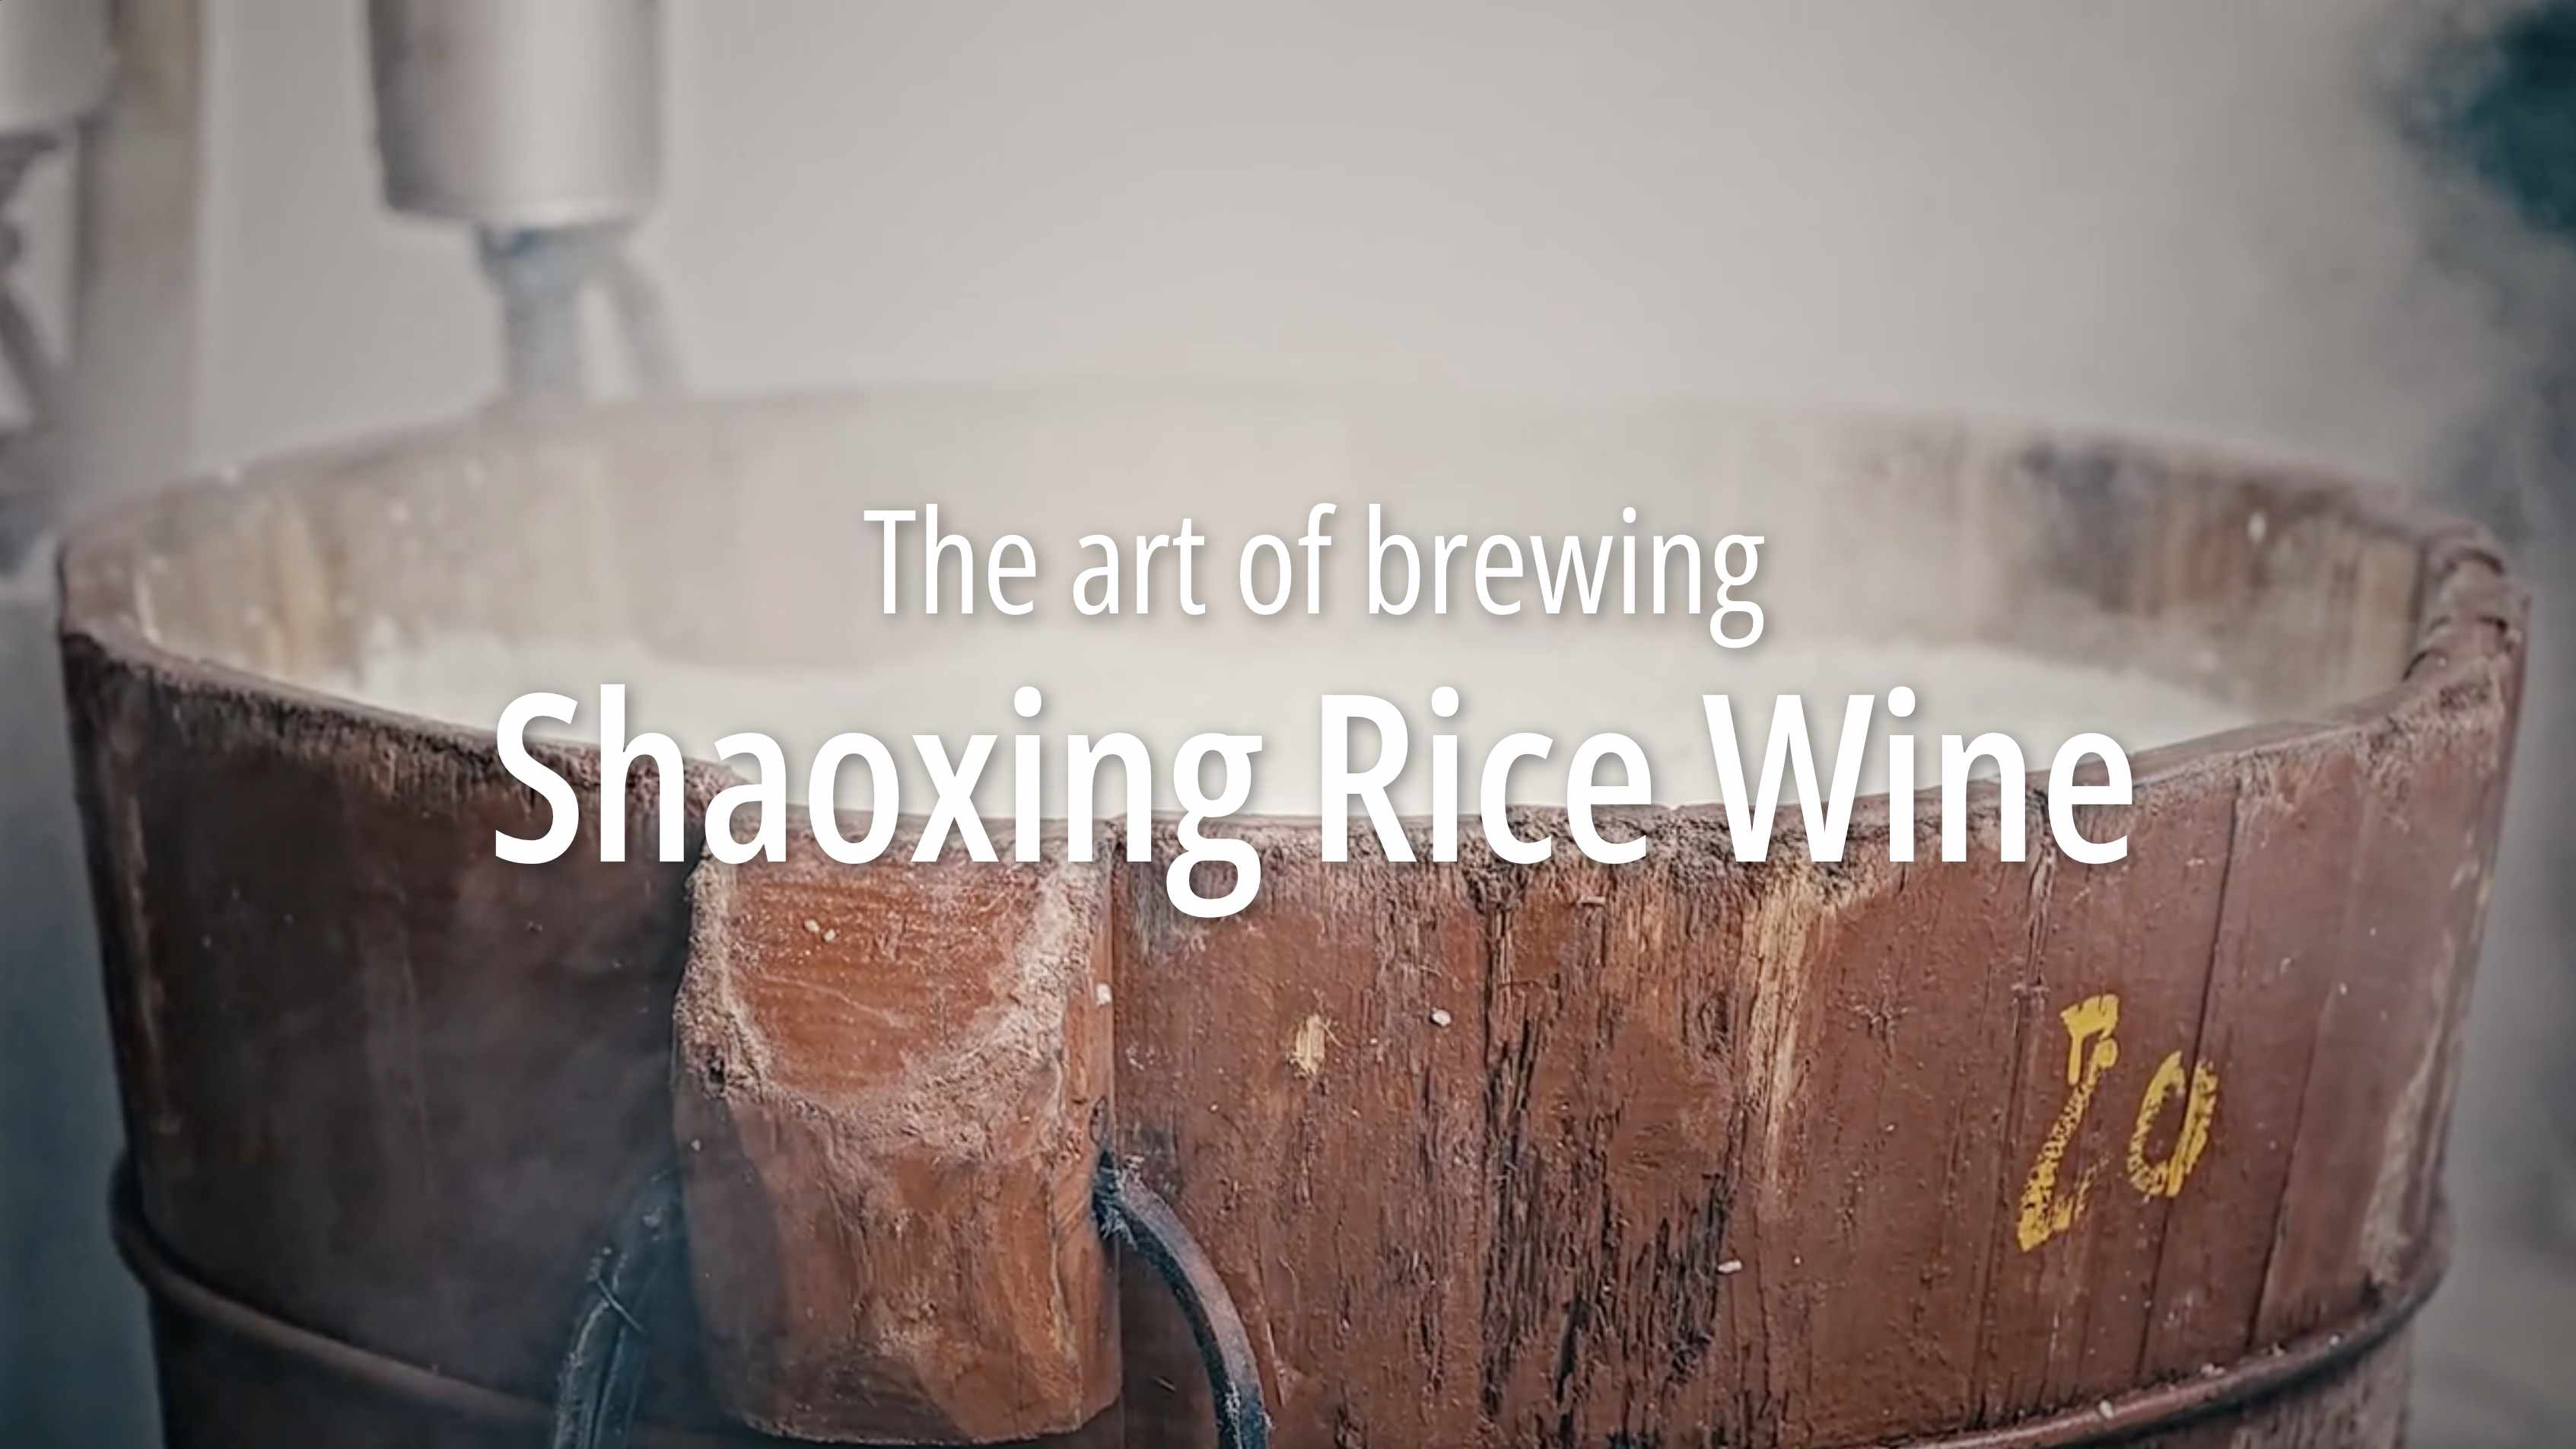 Load video: The making of Shaoxing Rice Wine - 古越龙山绍兴花雕黄酒酿造故事